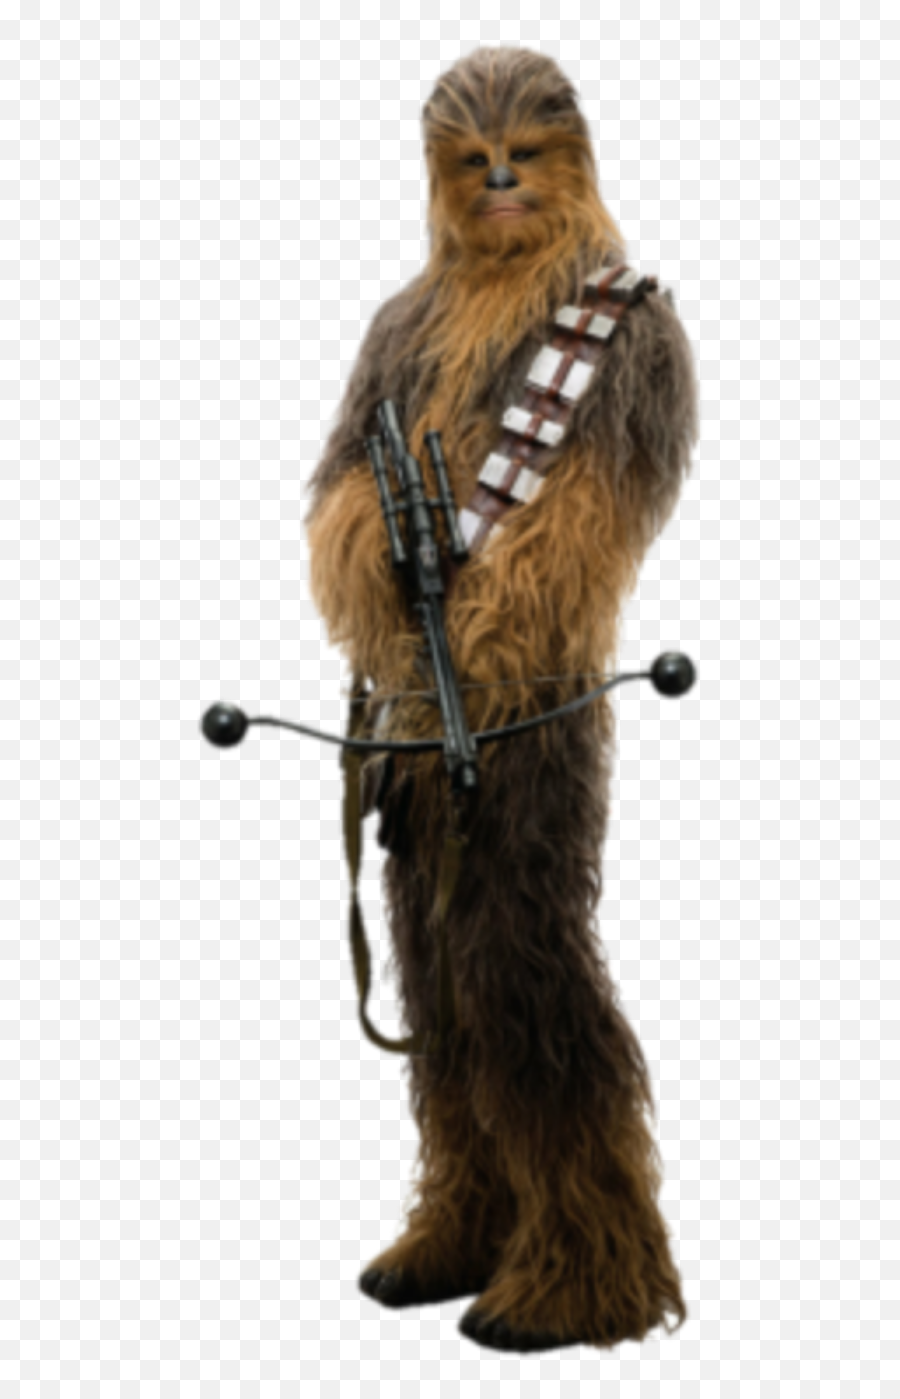 Colorful Maythe4thbewithyou Chewbacca - Star Wars Chewbacca Png Emoji,Chewbacca Emoji